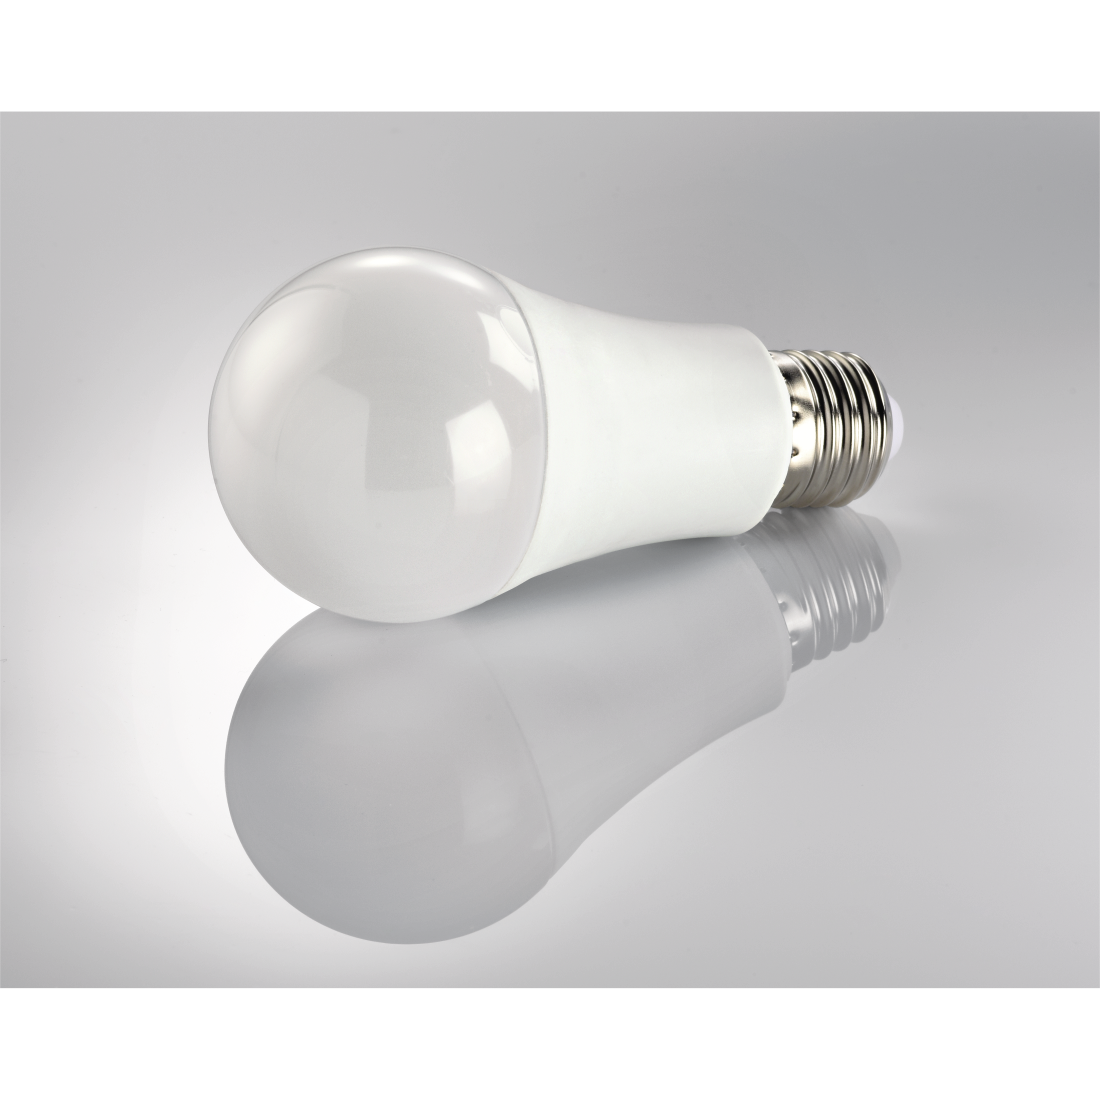 abx3 High-Res Image 3 - Xavax, LED Bulb, E27, 800lm replaces 60W, incandescent bulb, warm white/daylight